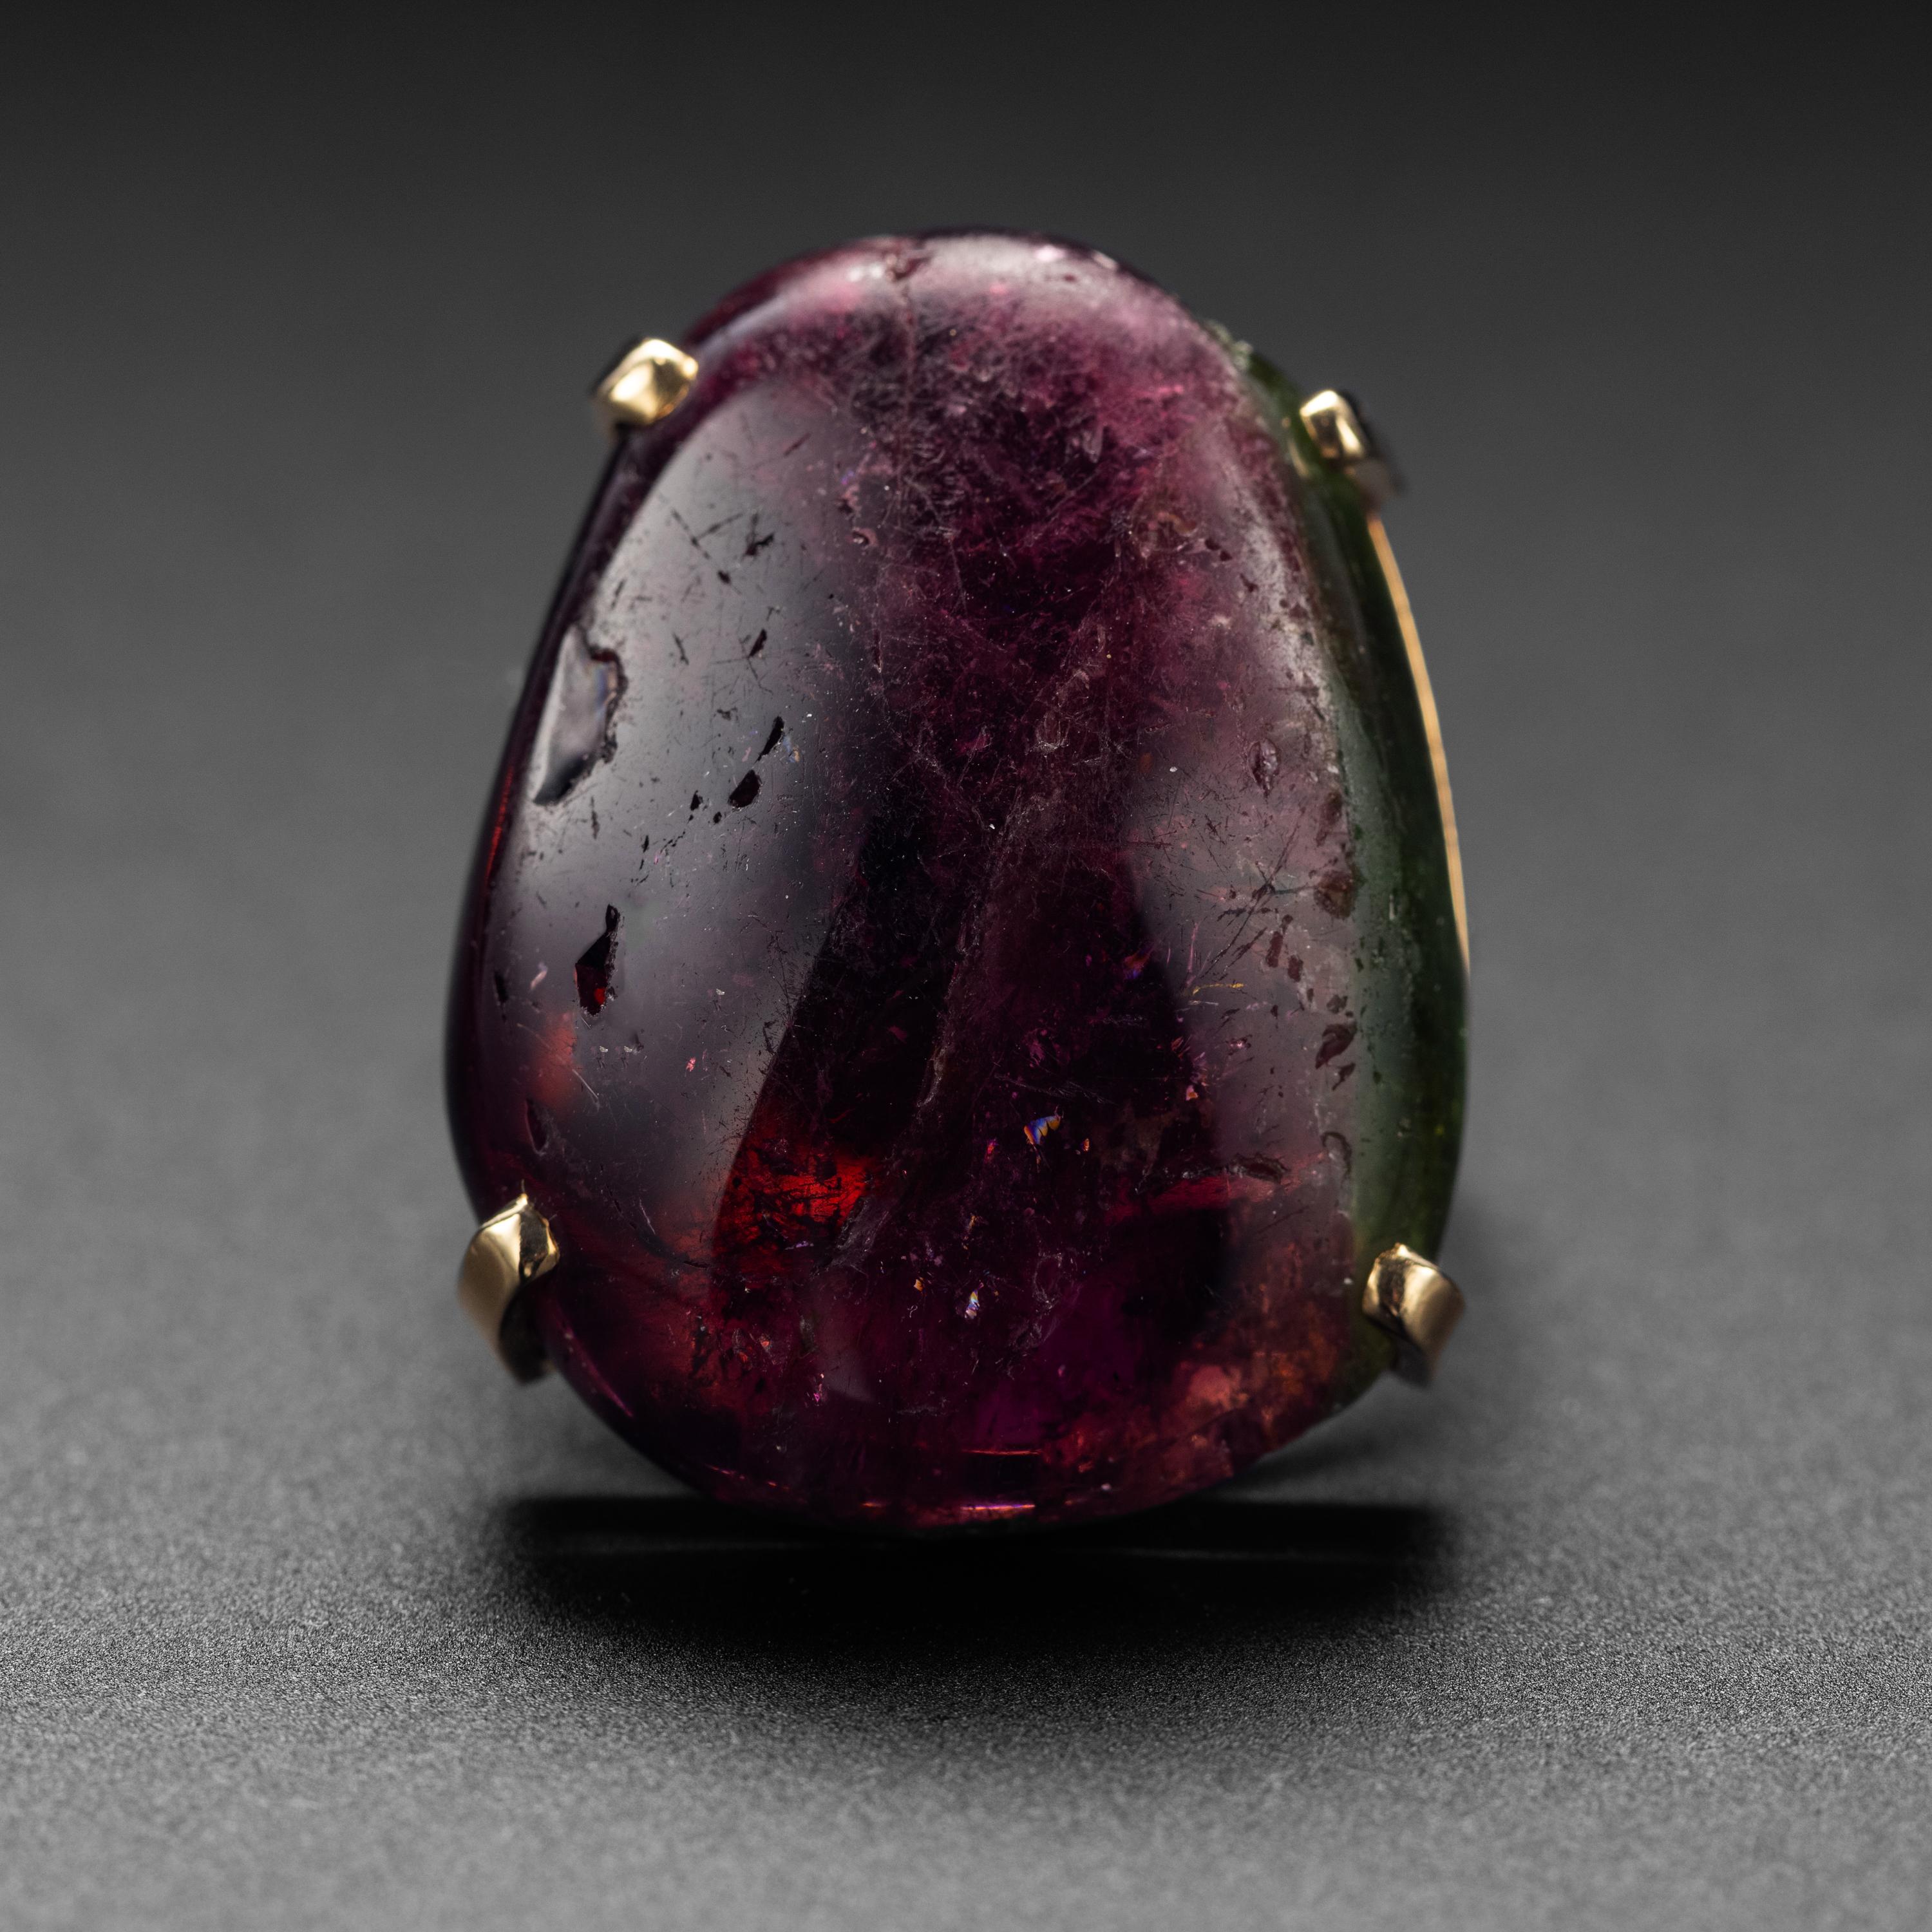 This is the ring your clairvoyant aunt would have left you in her will if only you'd had a clairvoyant aunt with a massive tourmaline ring. Measuring 31.35mm x 24mm and weighing approximately 53.5 carats, this bi-color tourmaline possesses the power